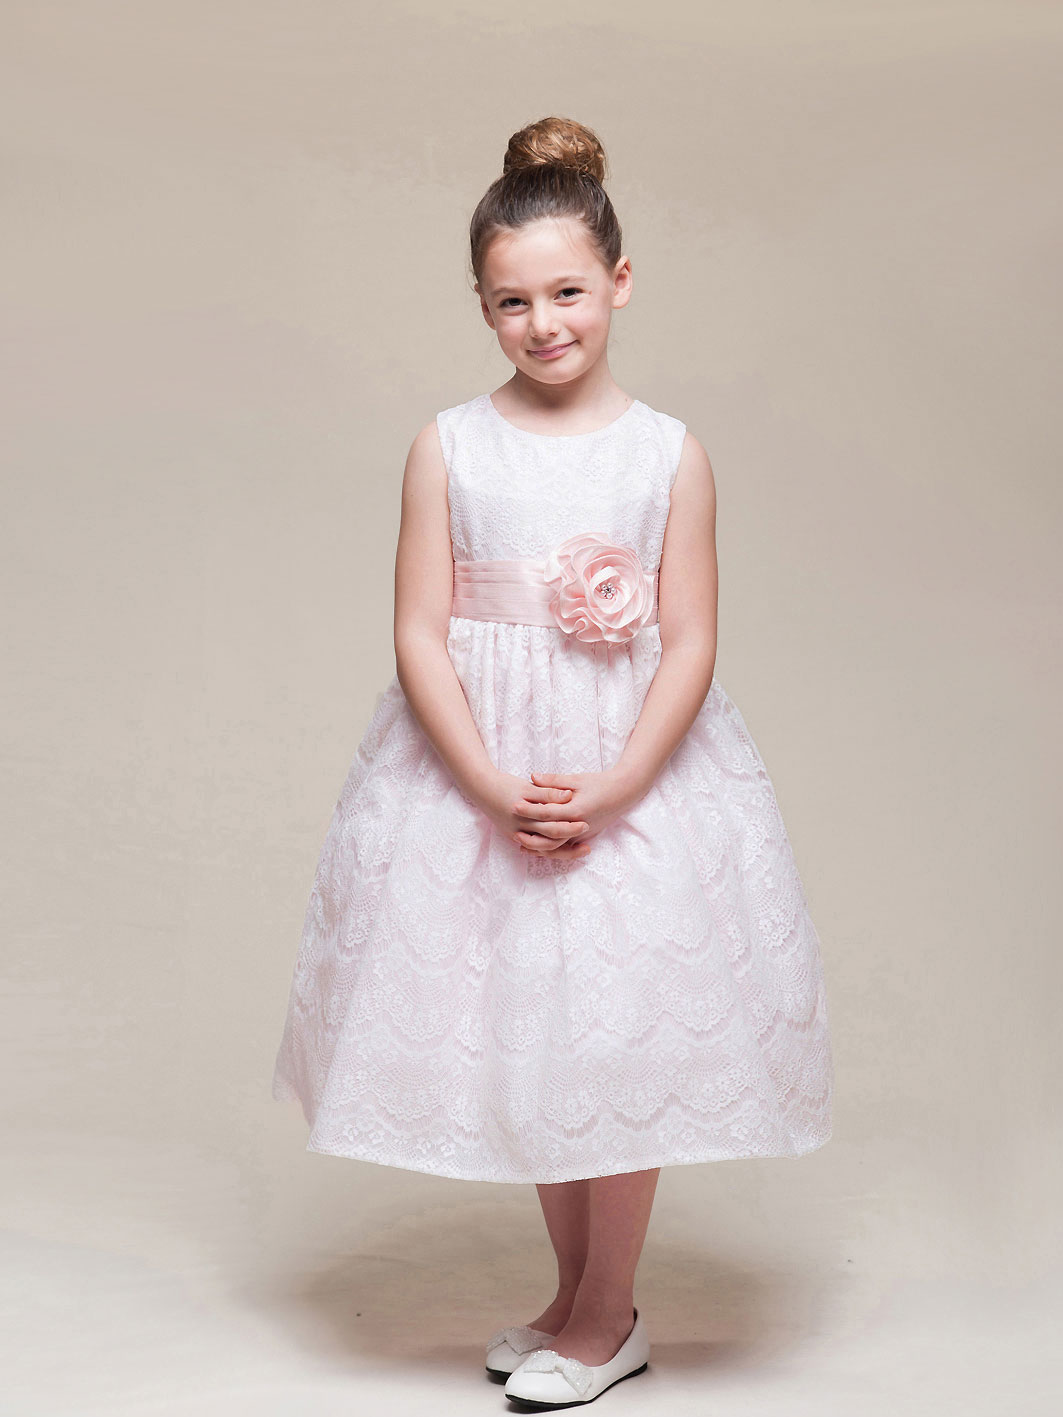 CK_962P - Girls Dress Style 962- Sleeveless Embossed Lace Dress in ...